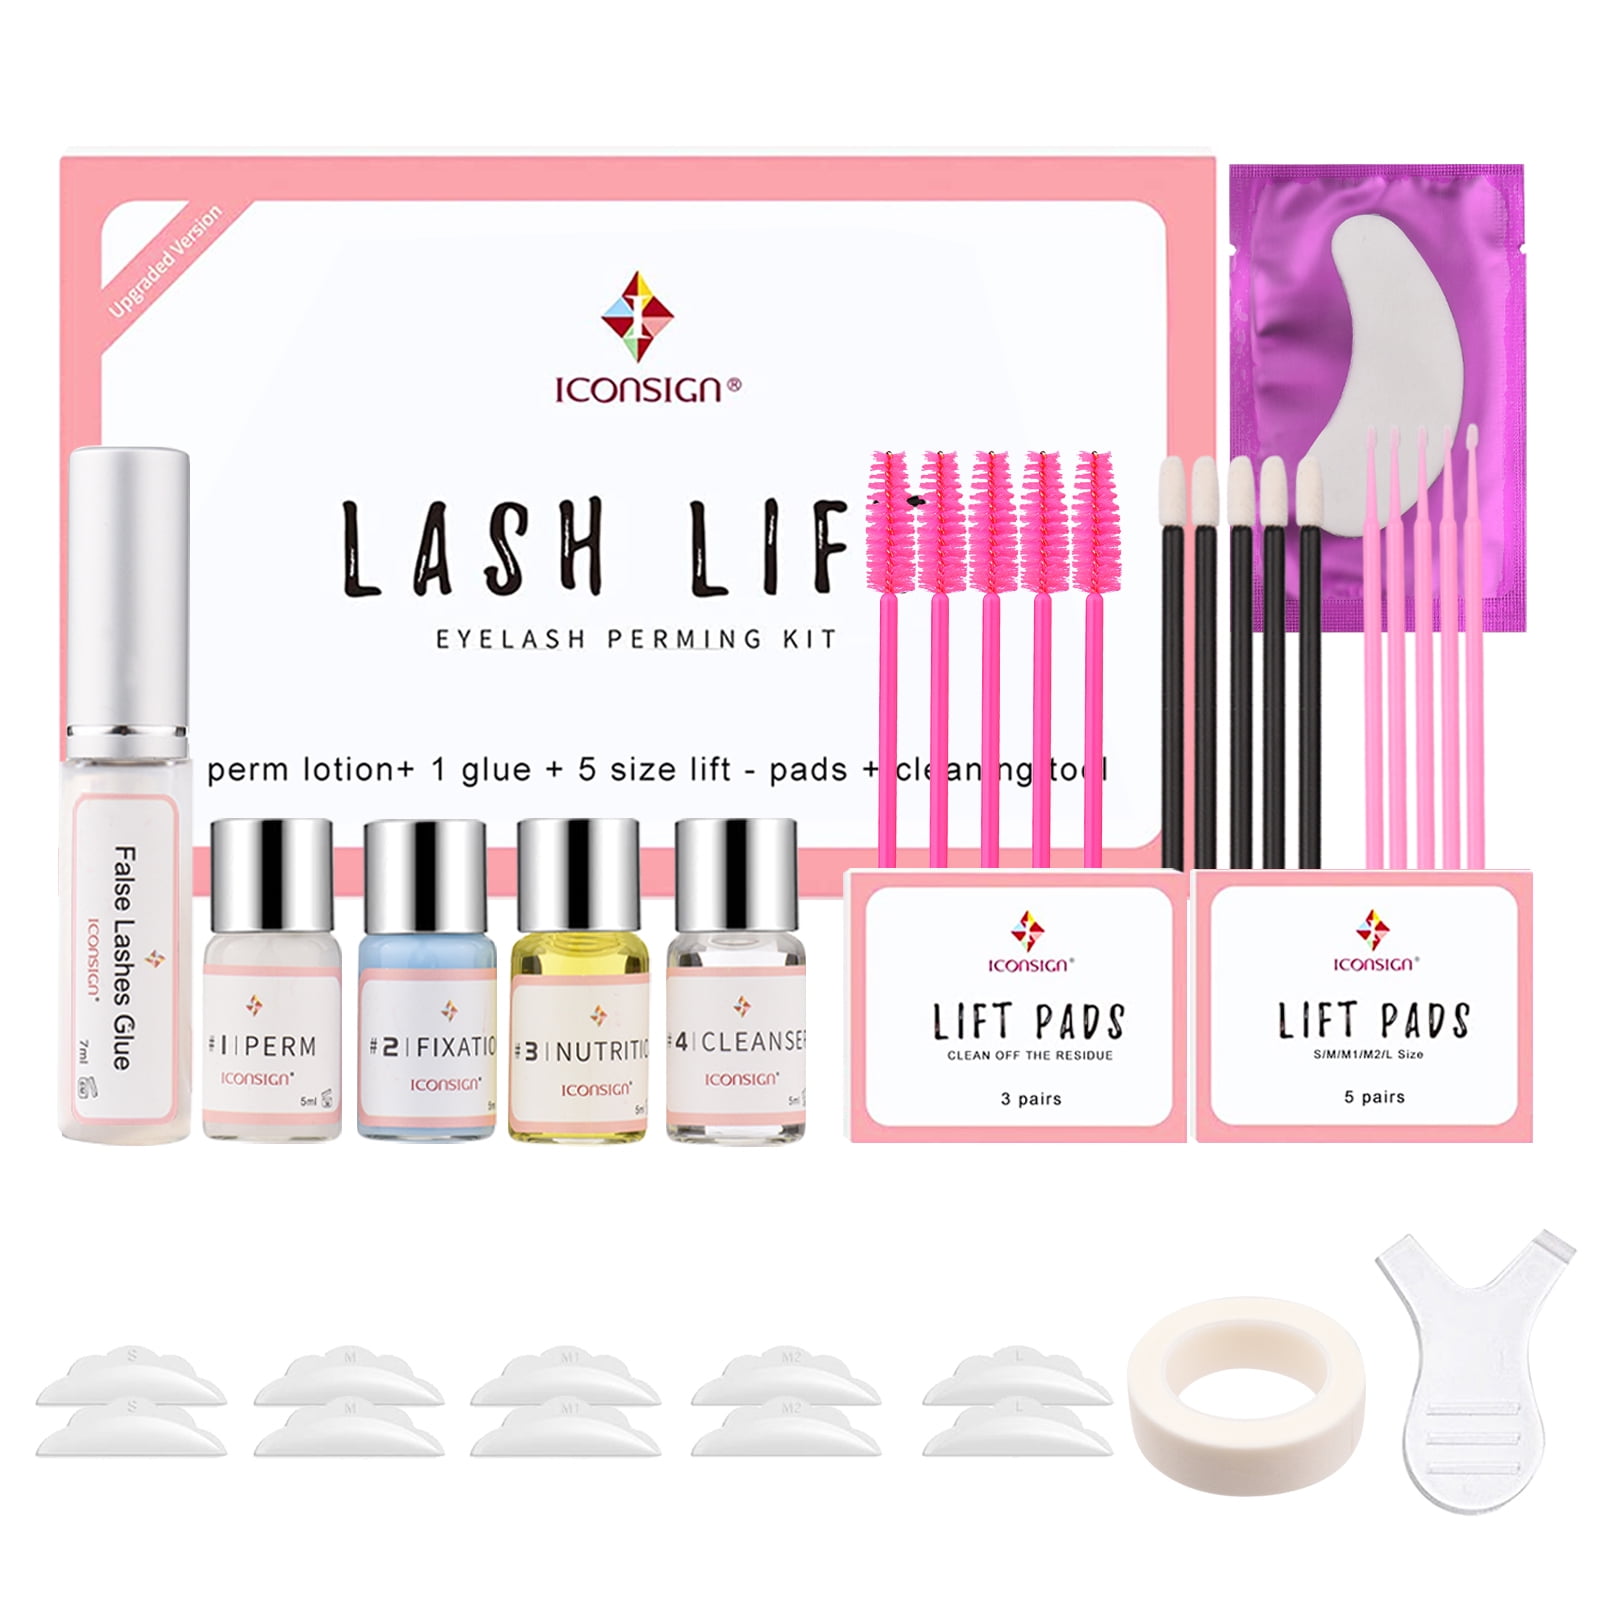  ICONSIGN Lash Lift Kit, Professional Salon Semi-Permanent  Curling Eyelash Perm Kit with Lash Shields, Eye Gel Pads and Brushes :  Beauty & Personal Care